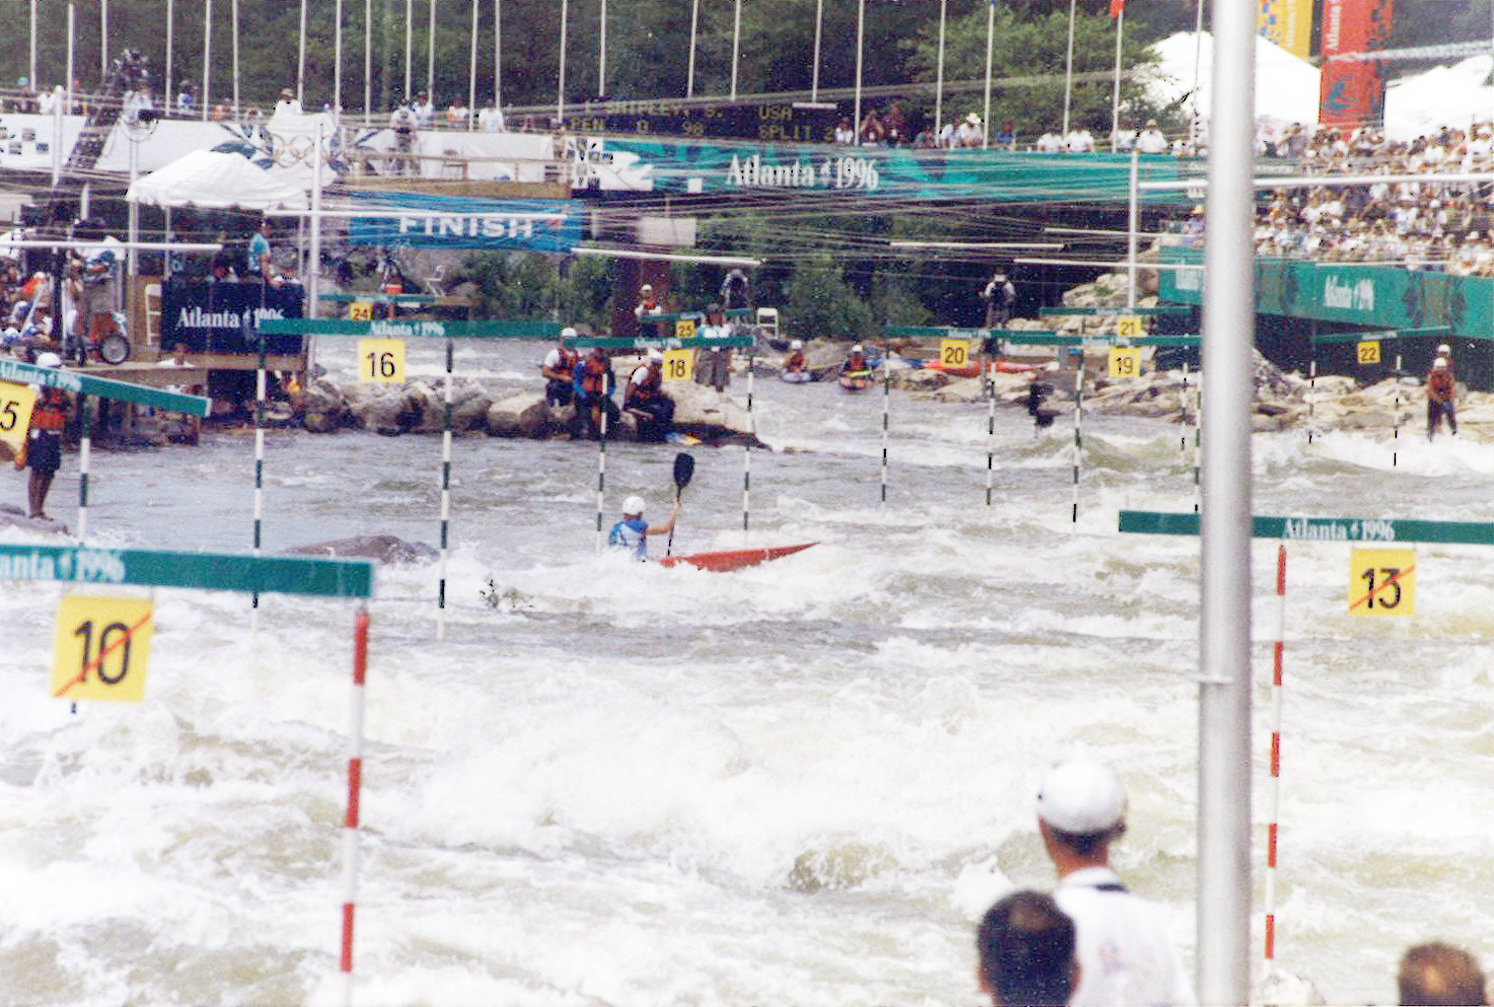 Canoe slalom also took place outside the host city the last time the United States hosted the Summer Olympics at Atlanta in 1996, when they were staged in Ducktown in Tennessee ©Getty Images